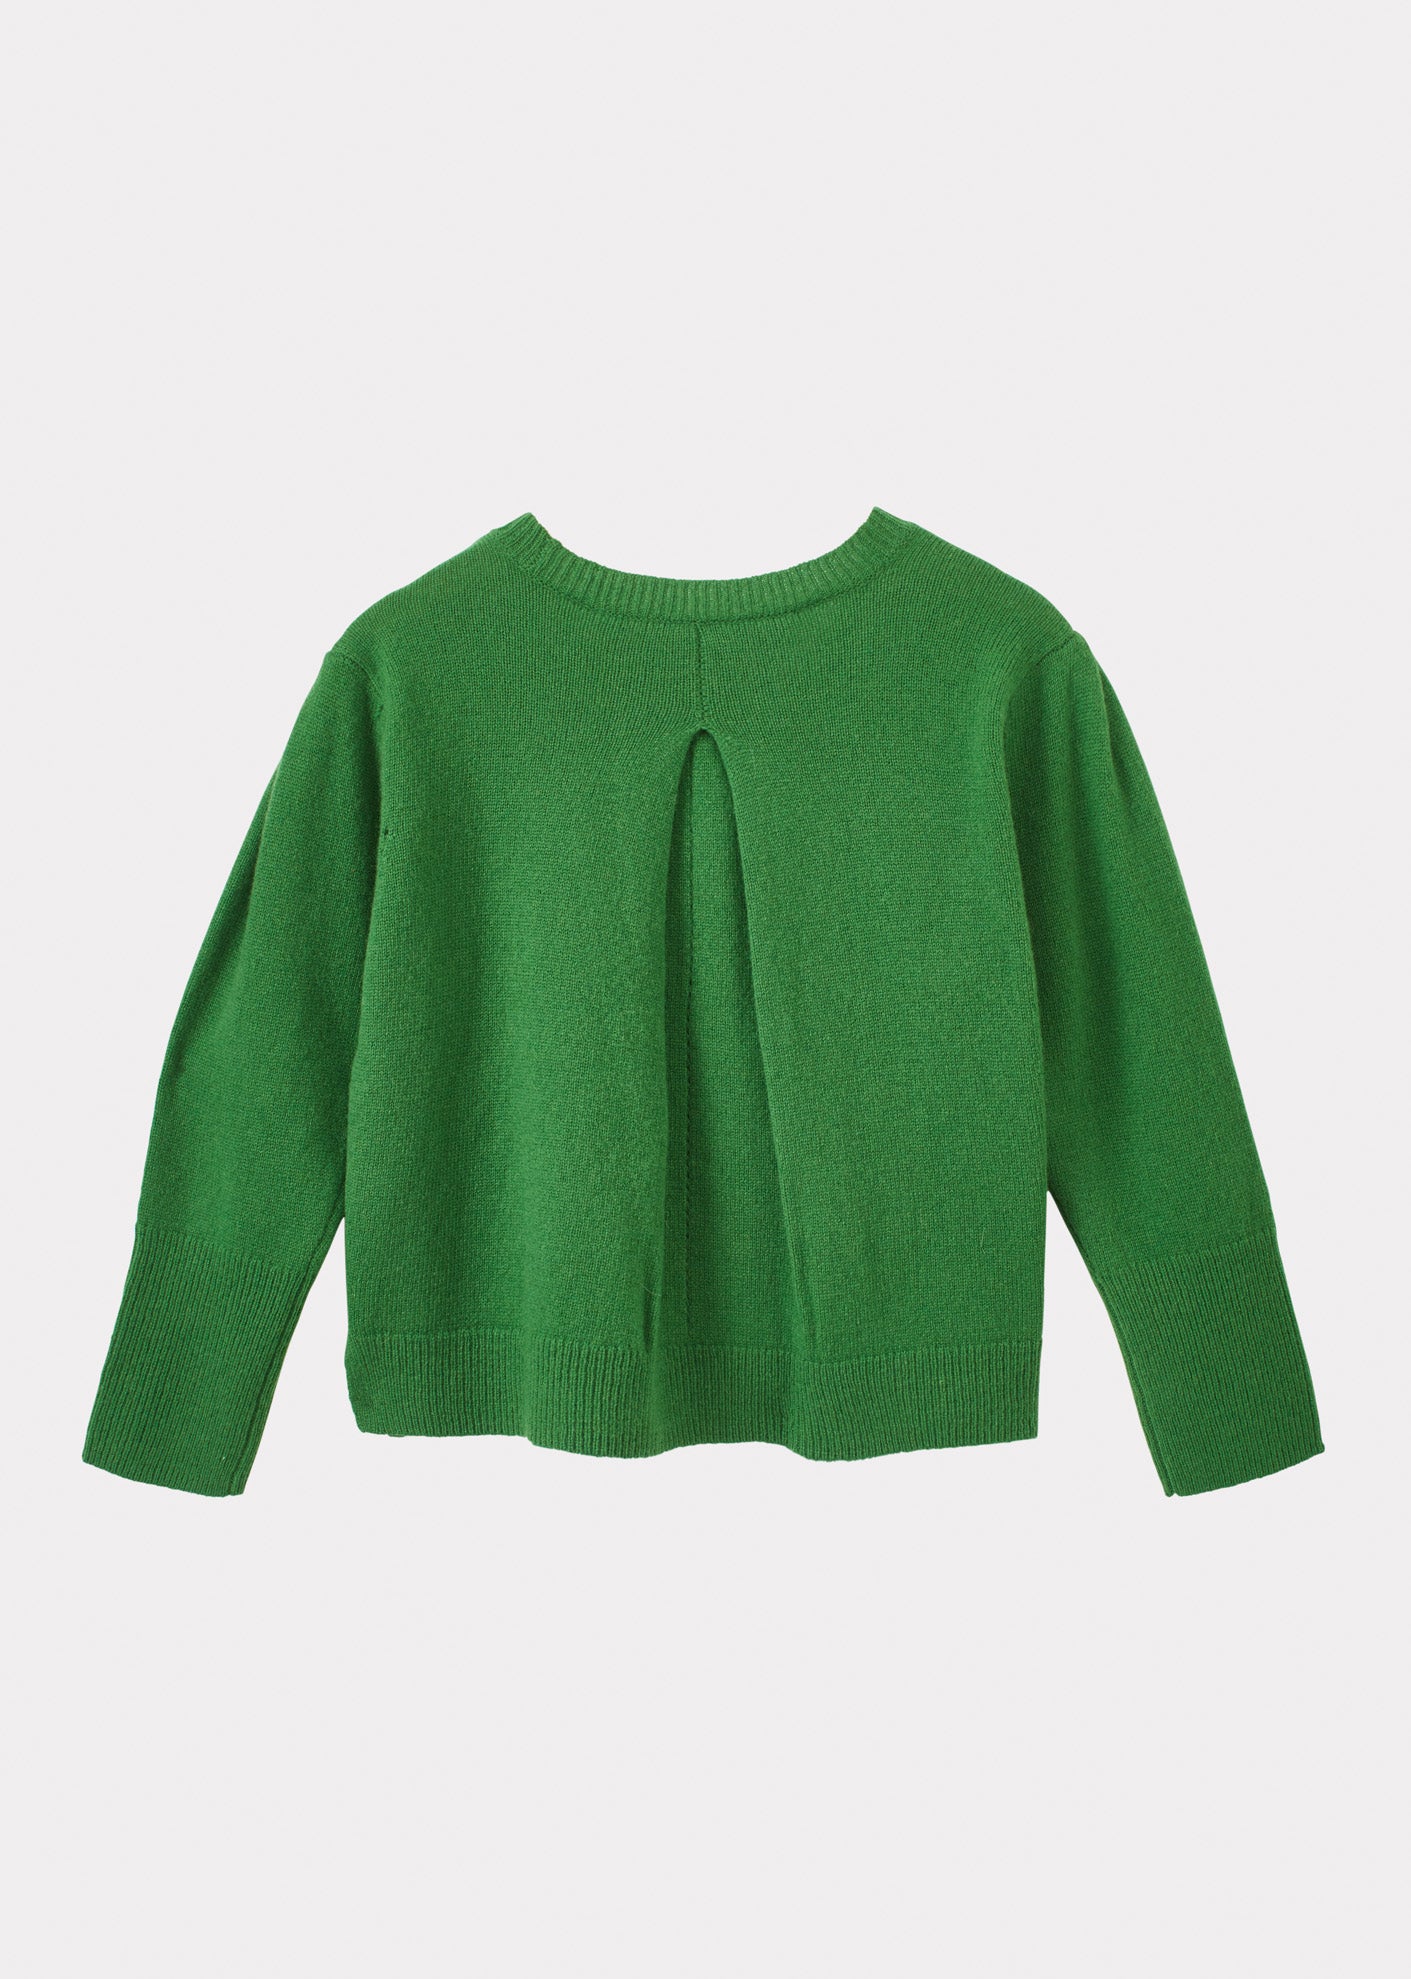 WOMAN CARDIGAN - FOREST GREEN